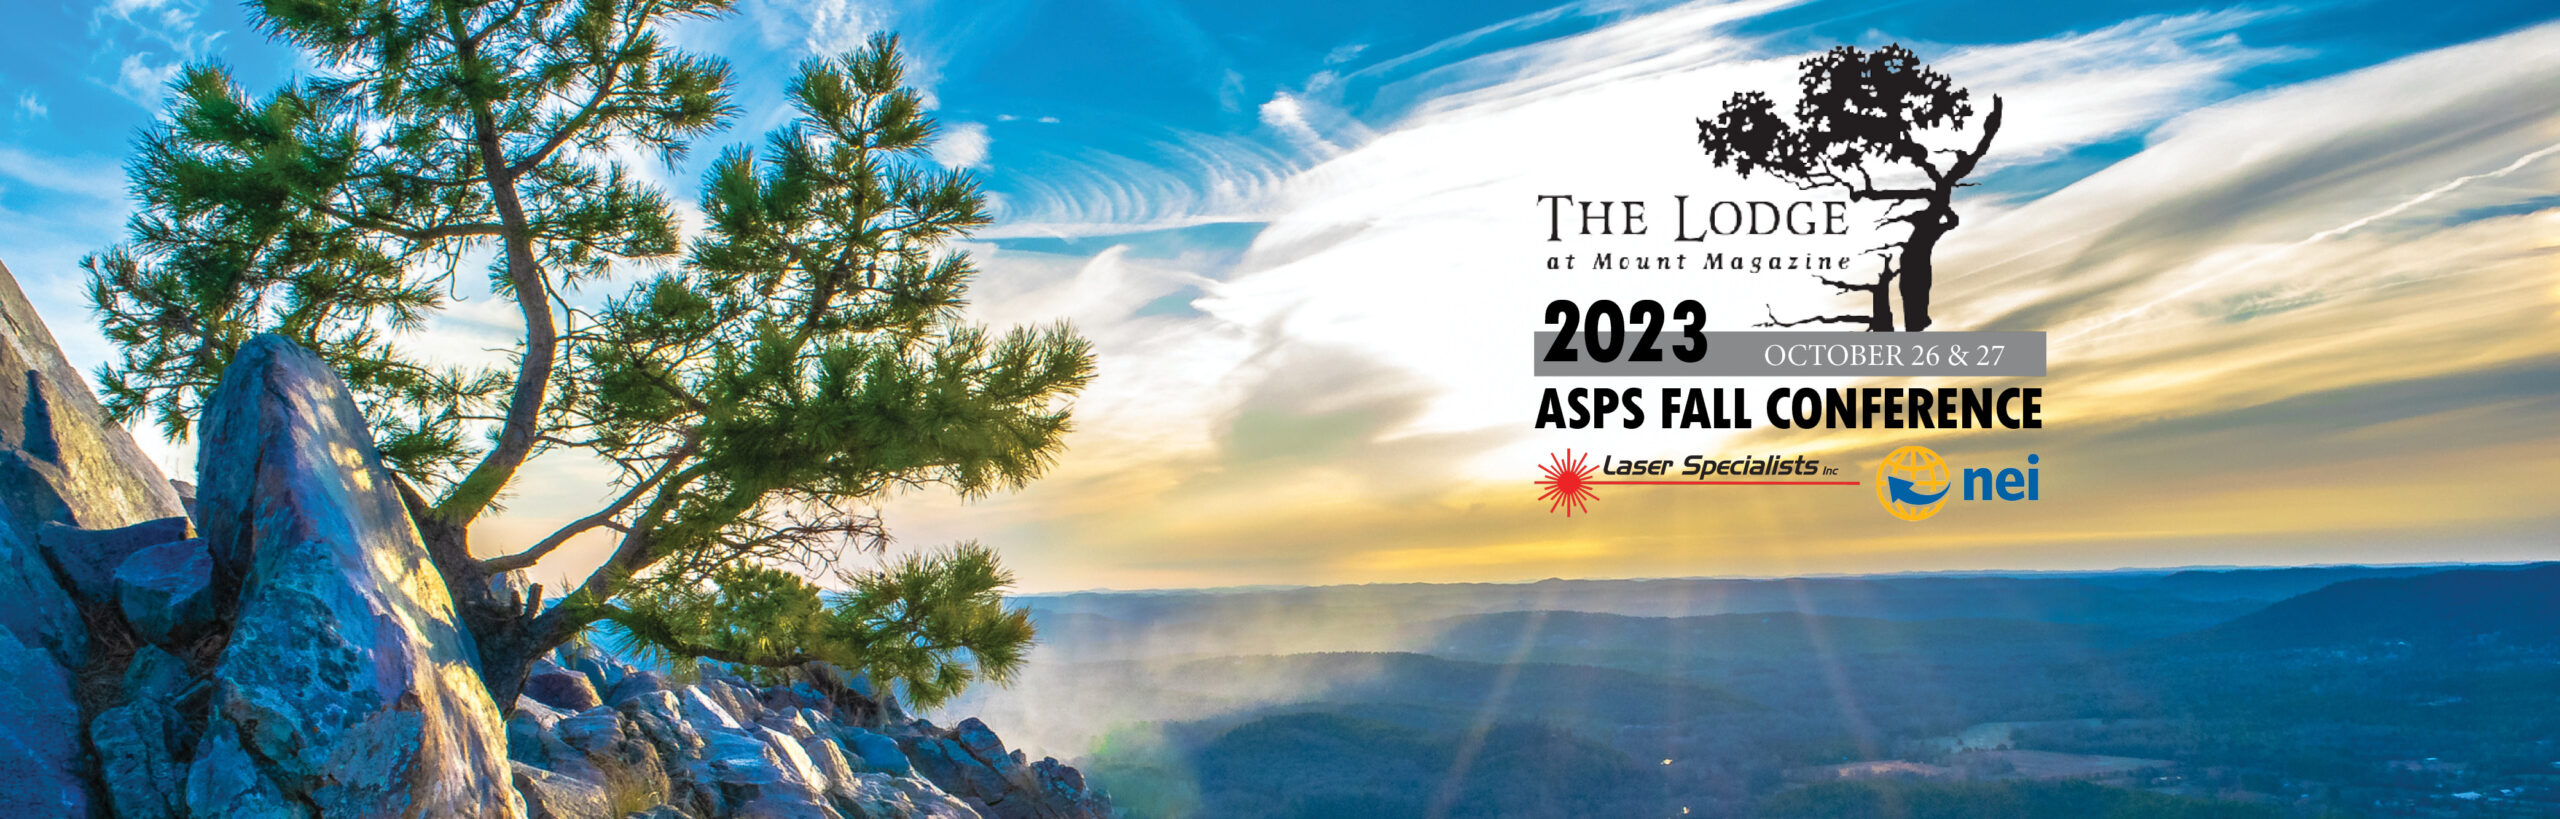 Asps Fall 2023 Conference